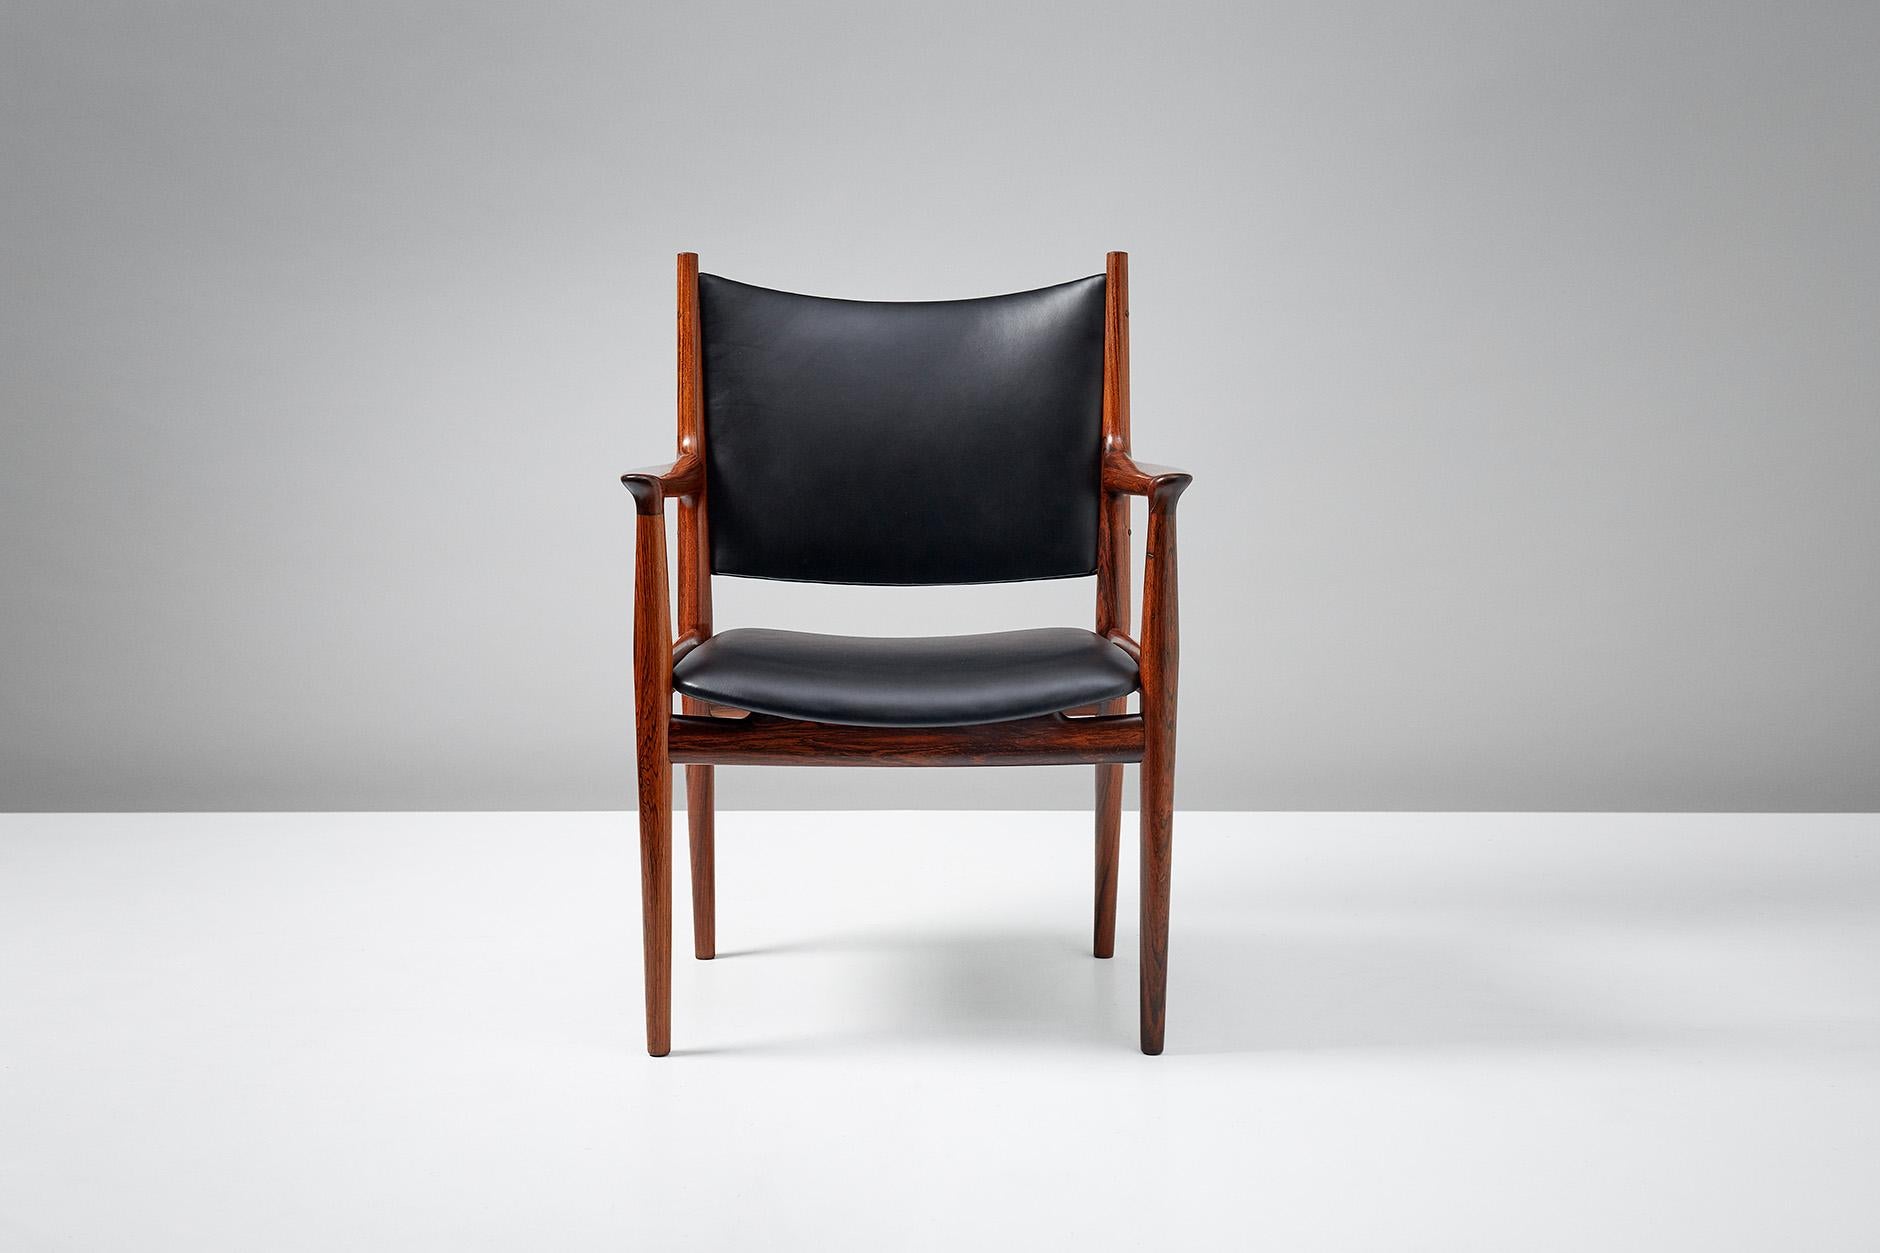 Hans J. Wegner
JH-713 conference chair, 1957

Wegner’s iconic armchair. This early example with patinated oak frame and cognac brown leather seat. Produced by Johannes Hansen, Denmark.